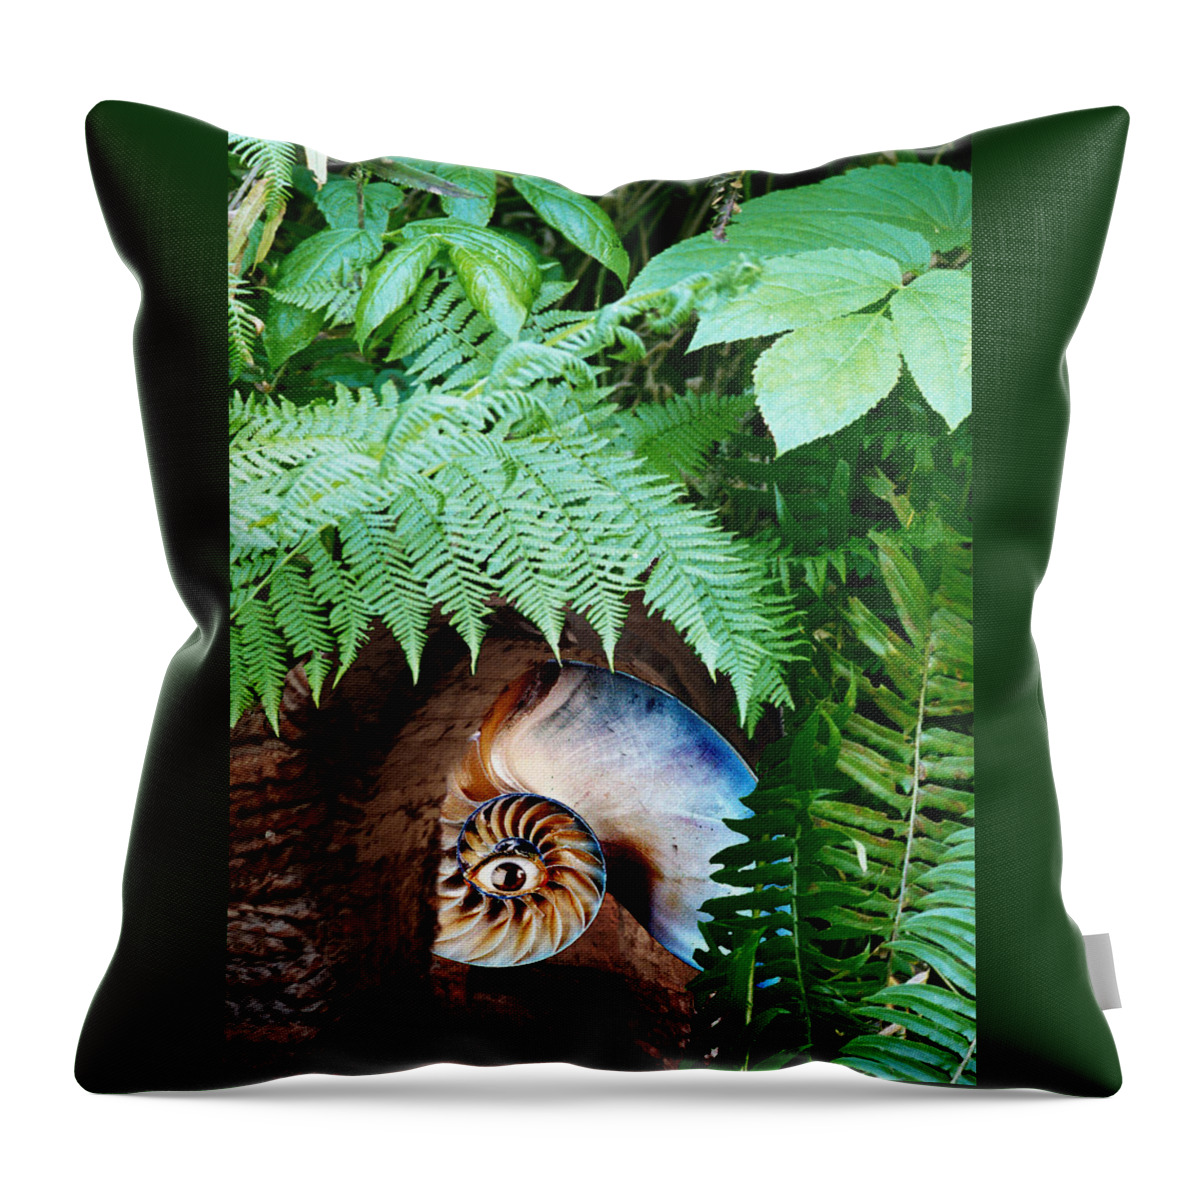 Nautilus Throw Pillow featuring the digital art Nautilus Landscape by Lisa Yount